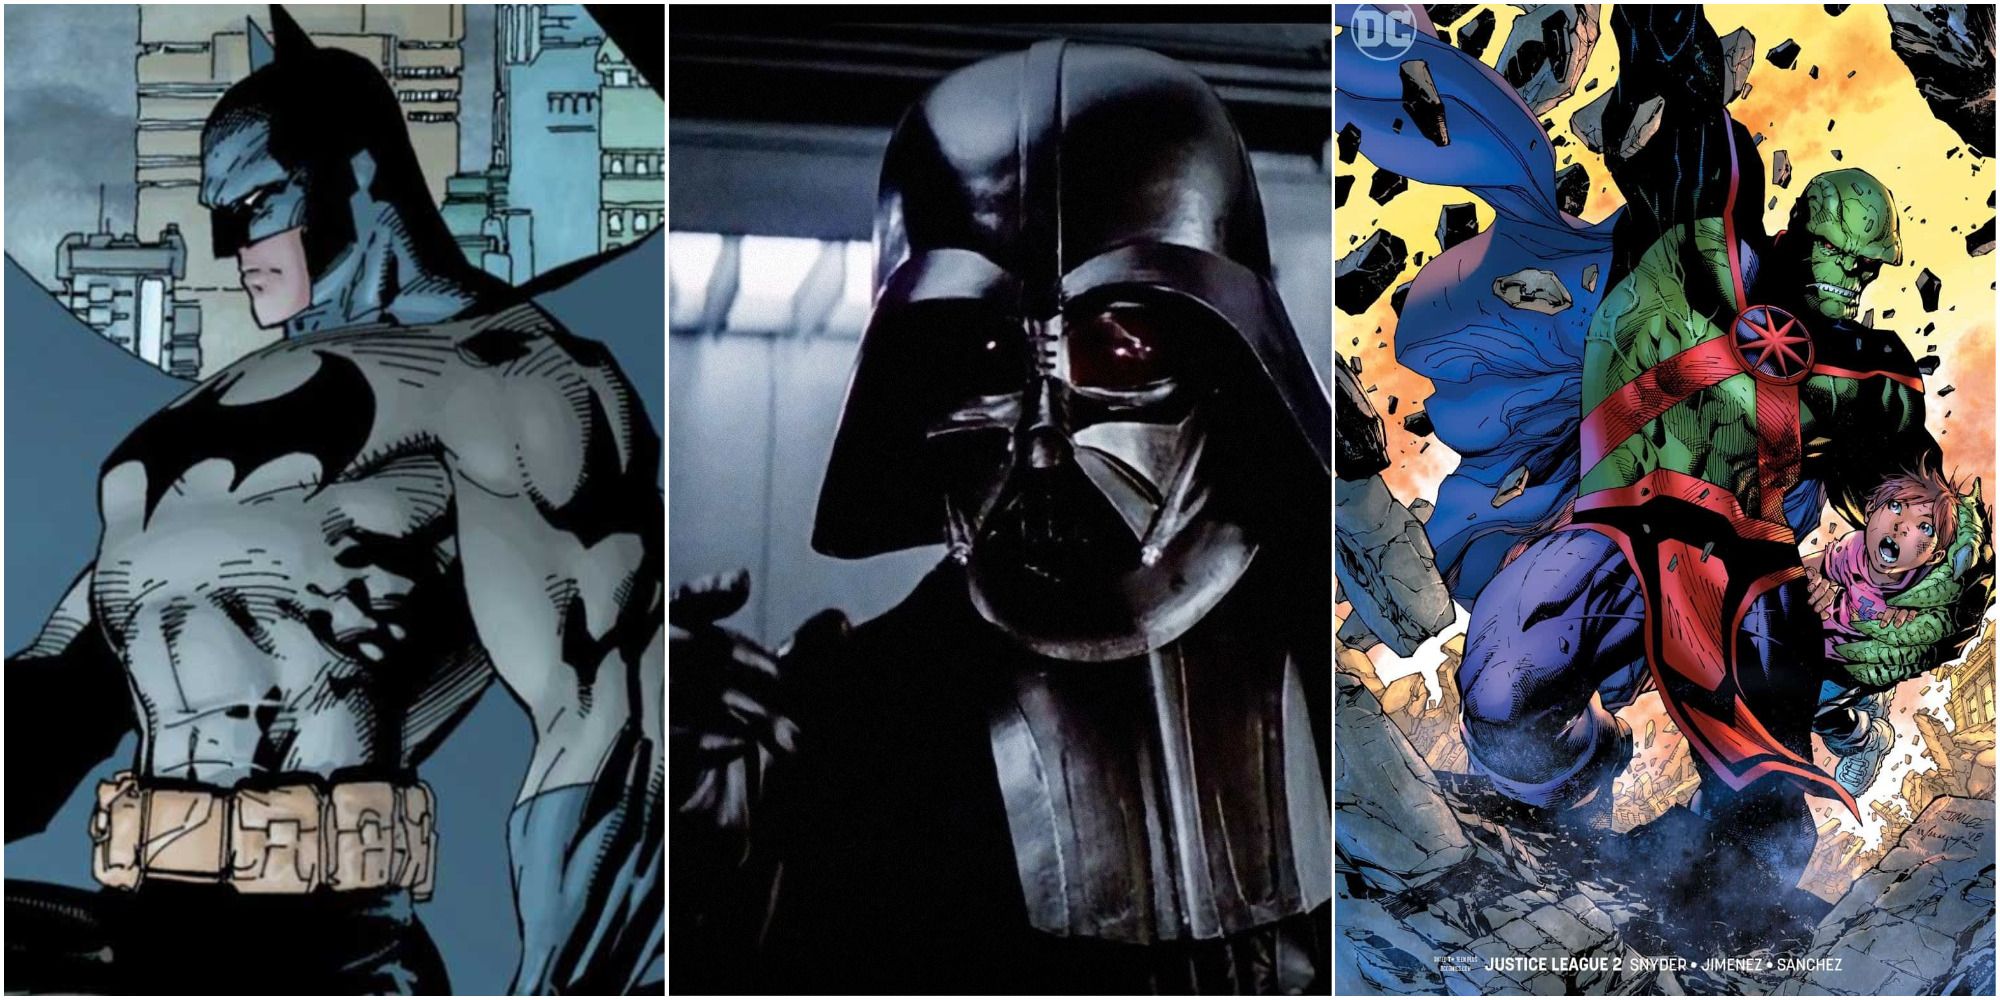 5 DC Heroes Who Could Survive A Darth Vader Assault (& 5 Who Couldn't)